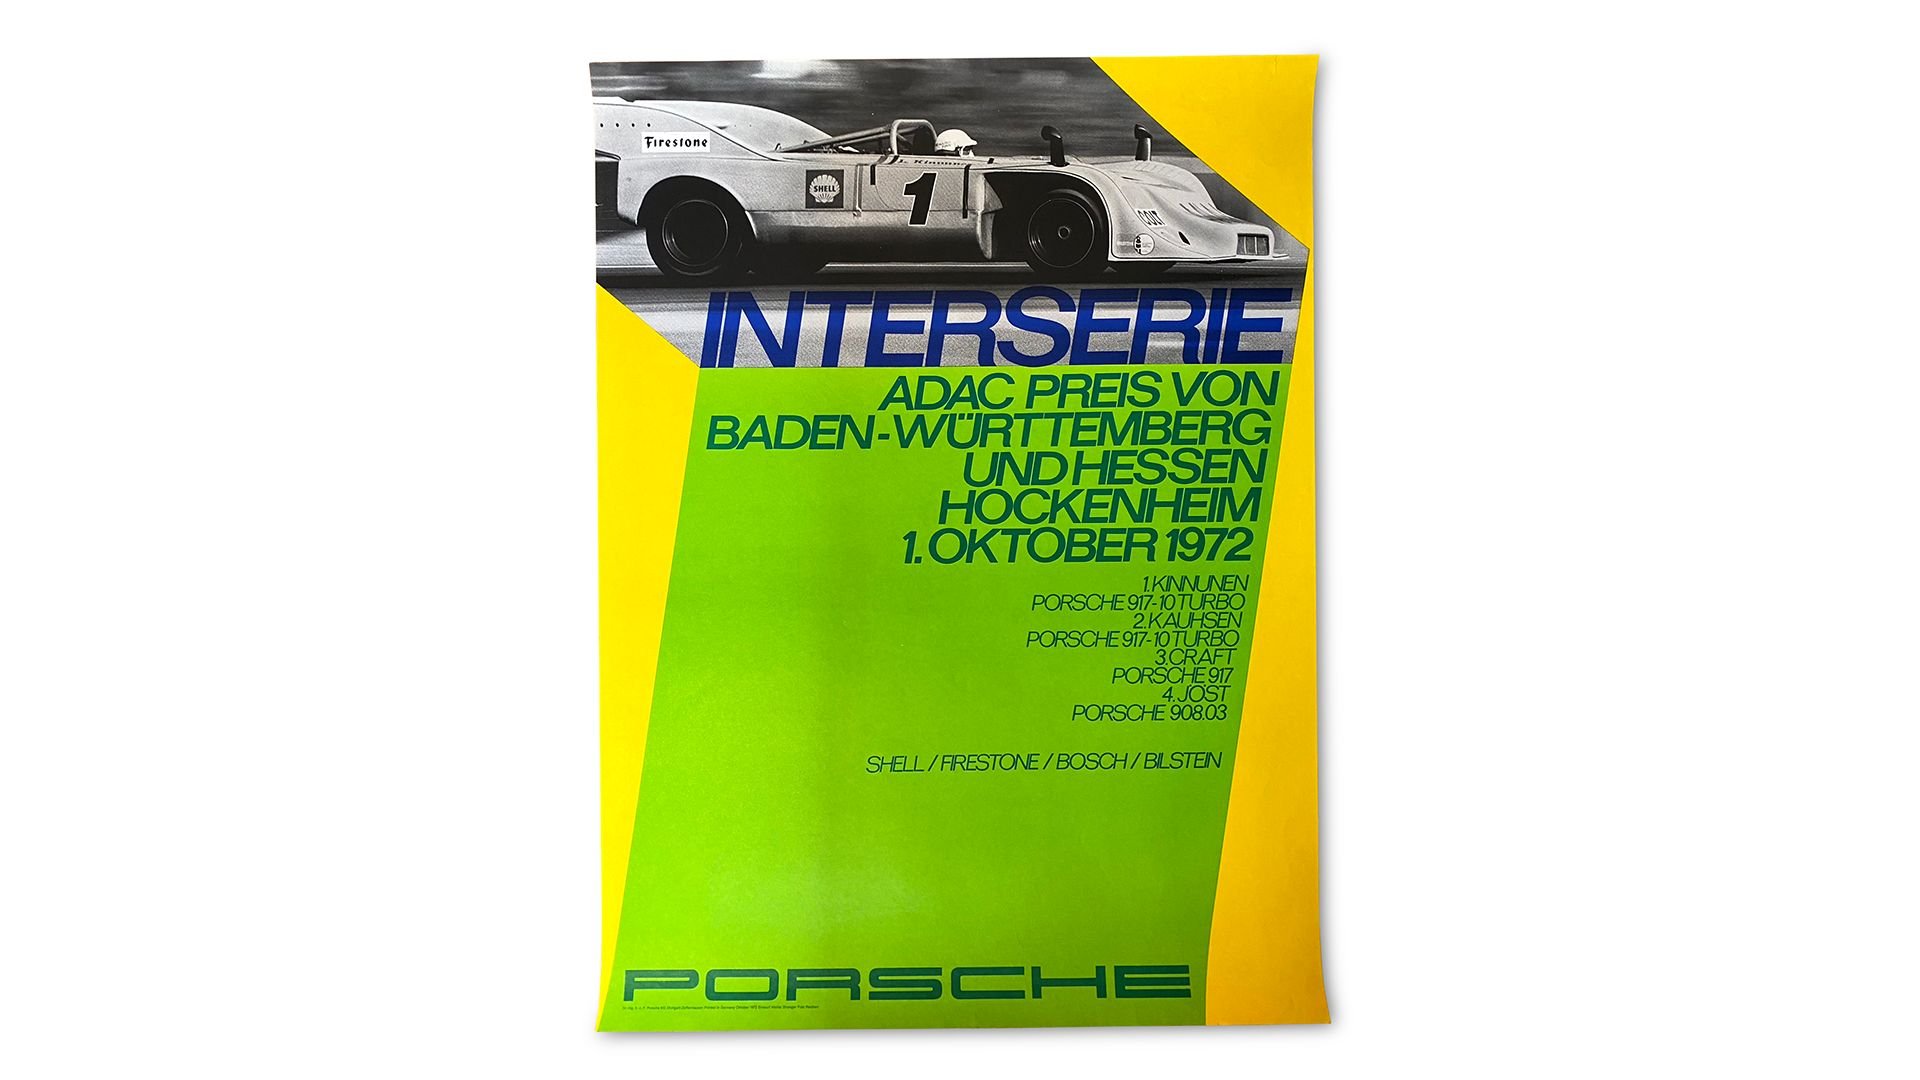 For Sale Group of 10 Porsche Interserie 917/10 Factory Racing Posters 1972-1973